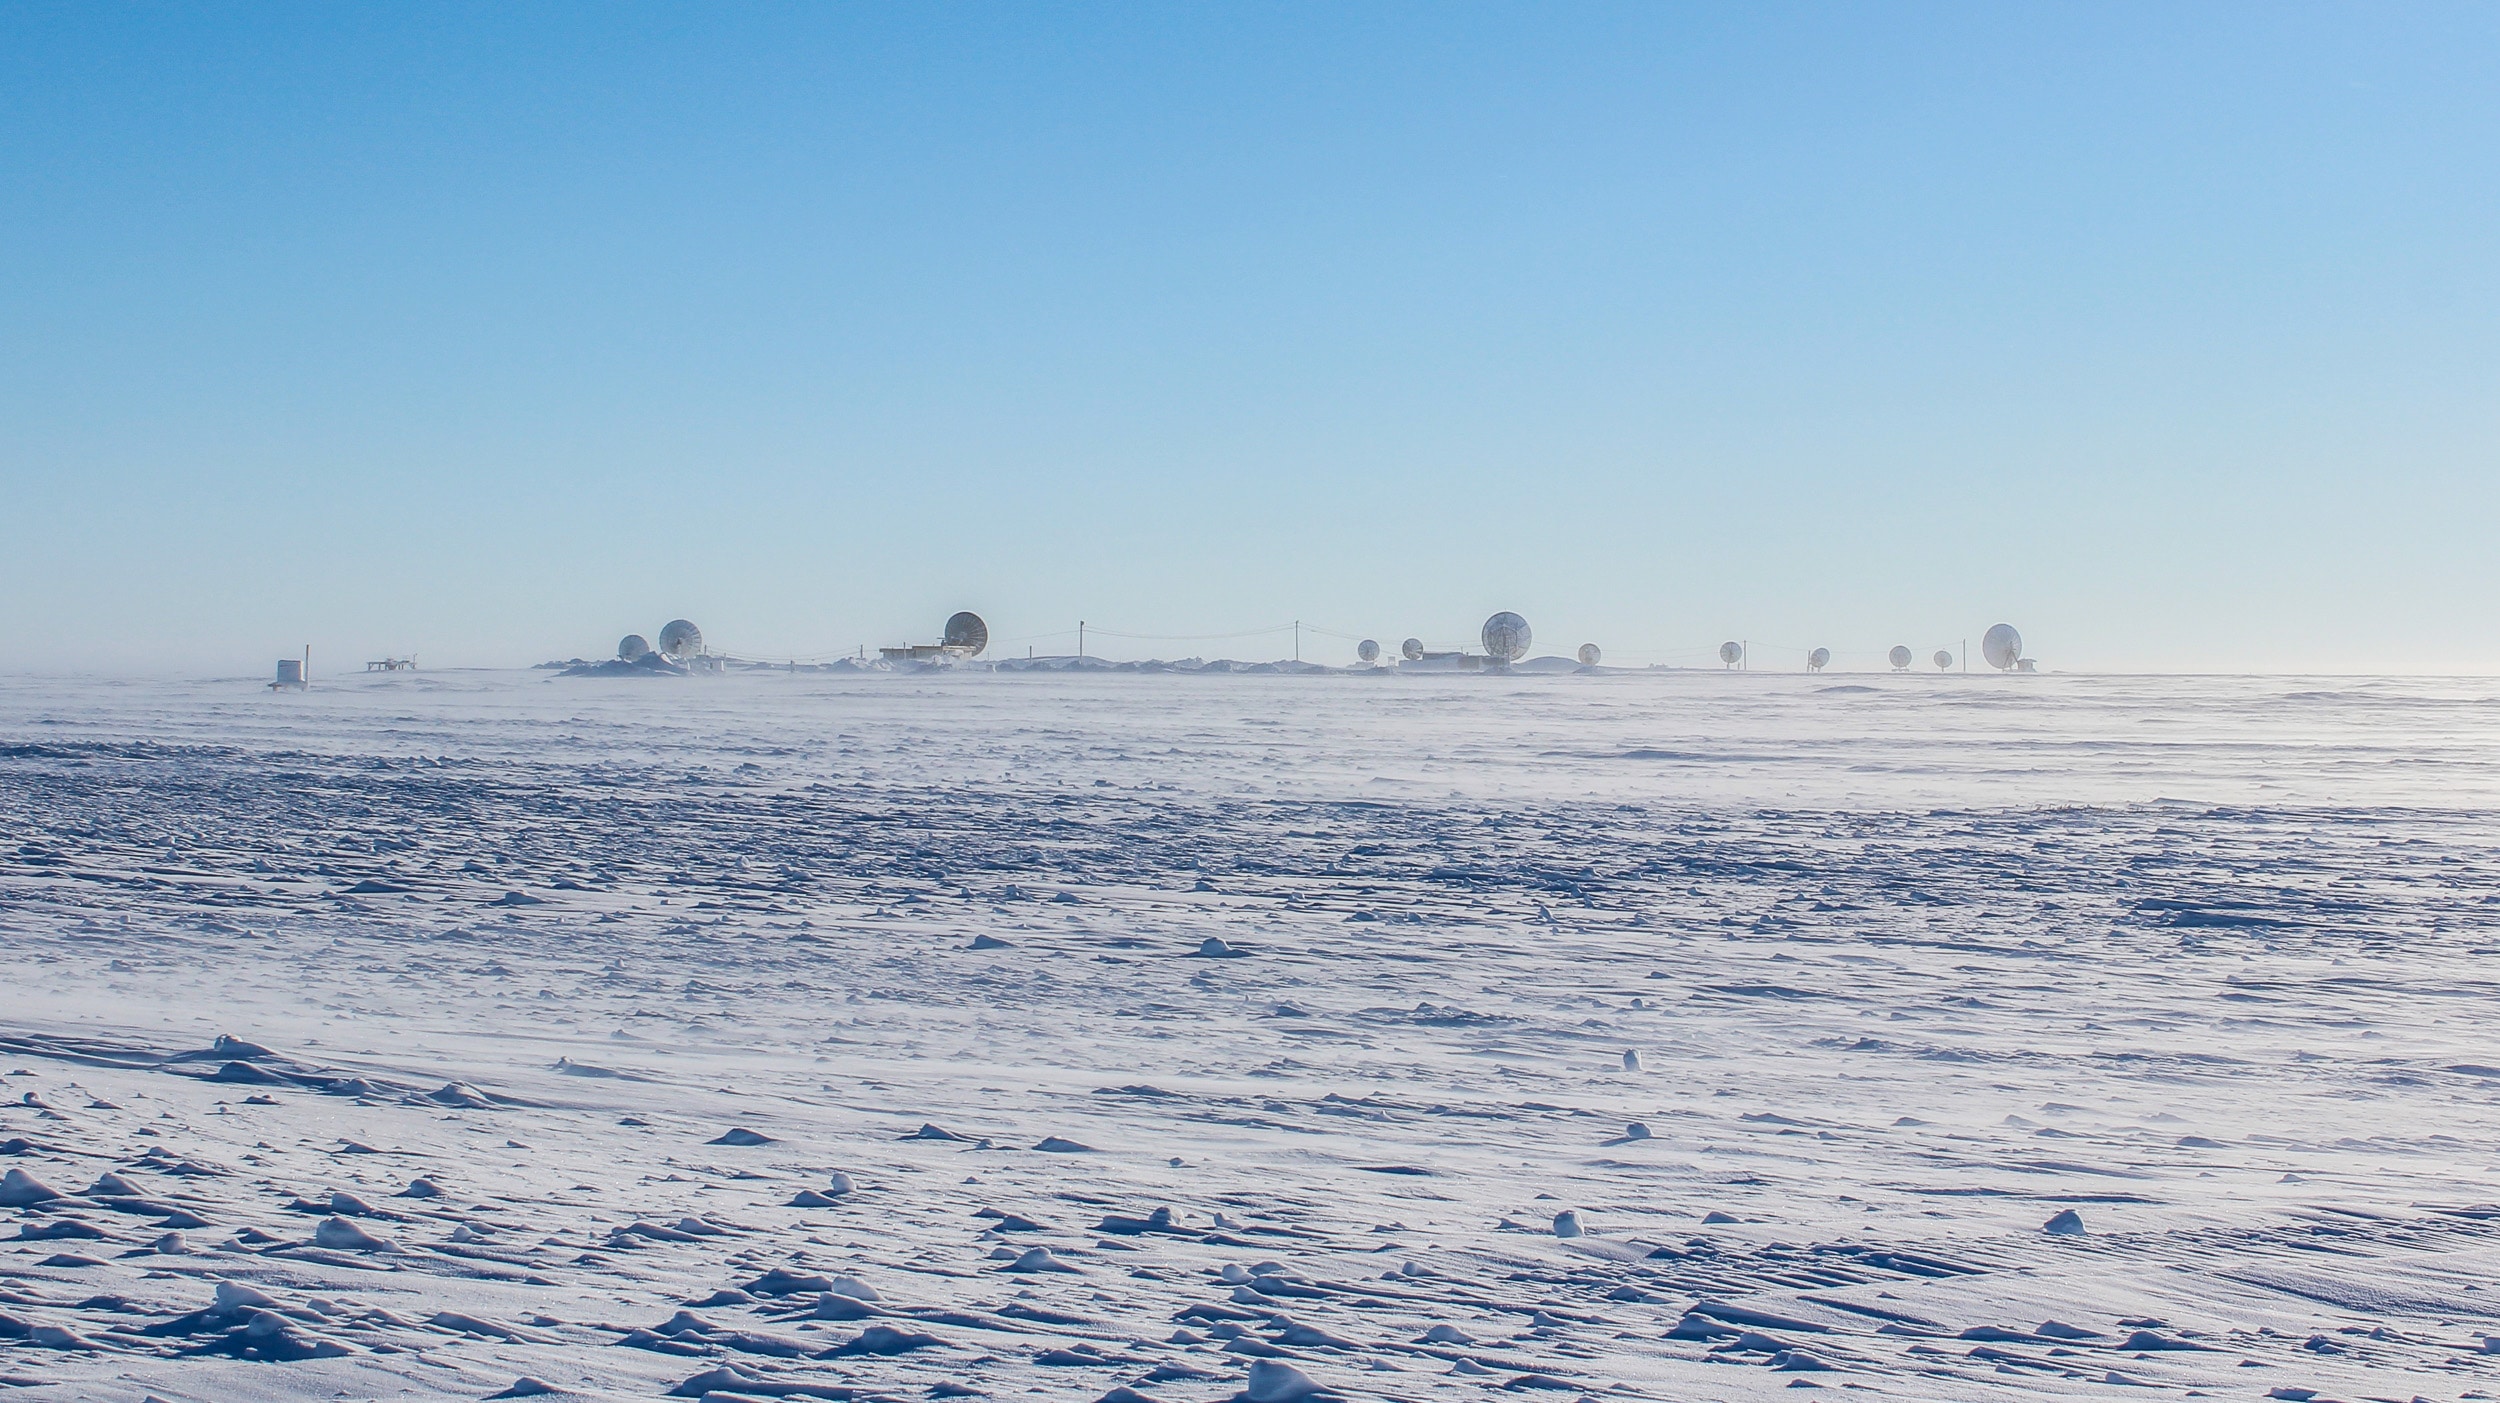 Arctic landscape of frozen coastal tundra in Barrow, Alaska, with satellite antennas in the background